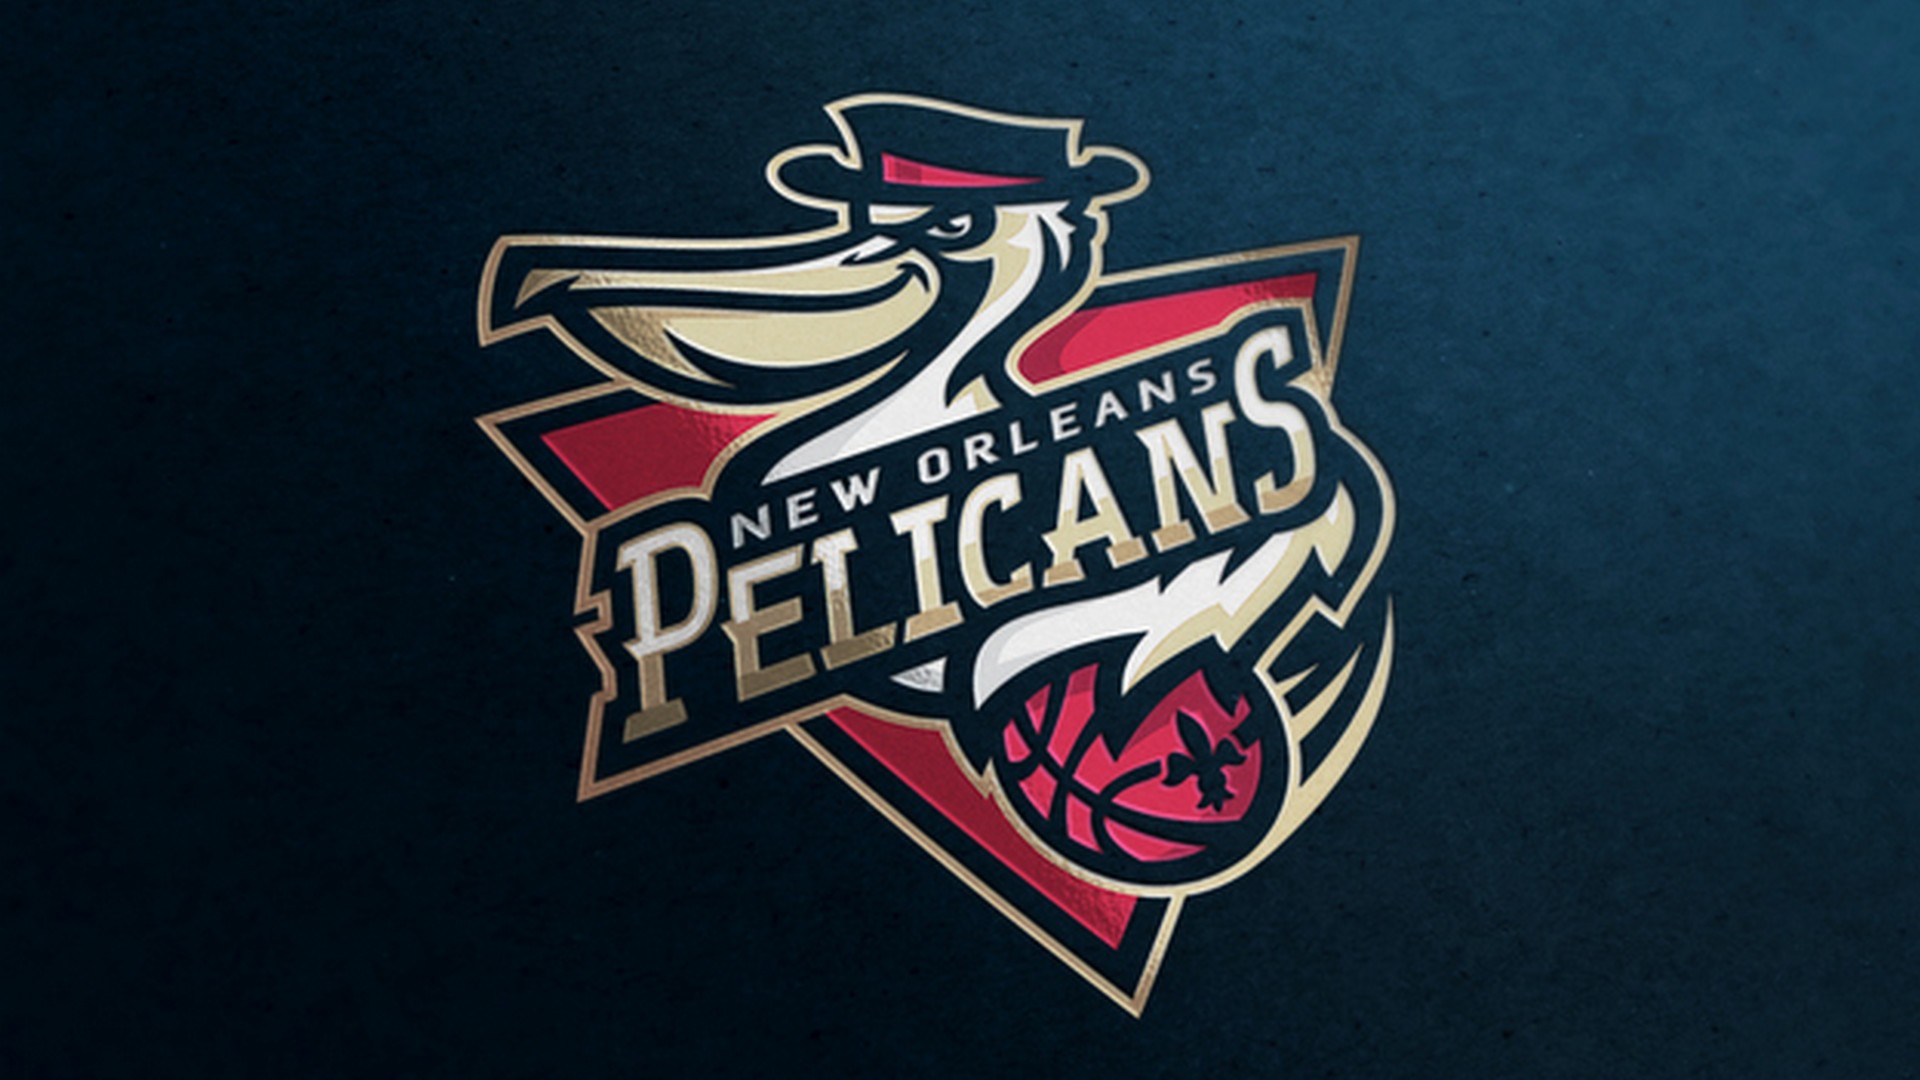 New Orleans Pelicans For PC Wallpaper with high-resolution 1920x1080 pixel. You can use this wallpaper for your Desktop Computer Backgrounds, Windows or Mac Screensavers, iPhone Lock screen, Tablet or Android and another Mobile Phone device